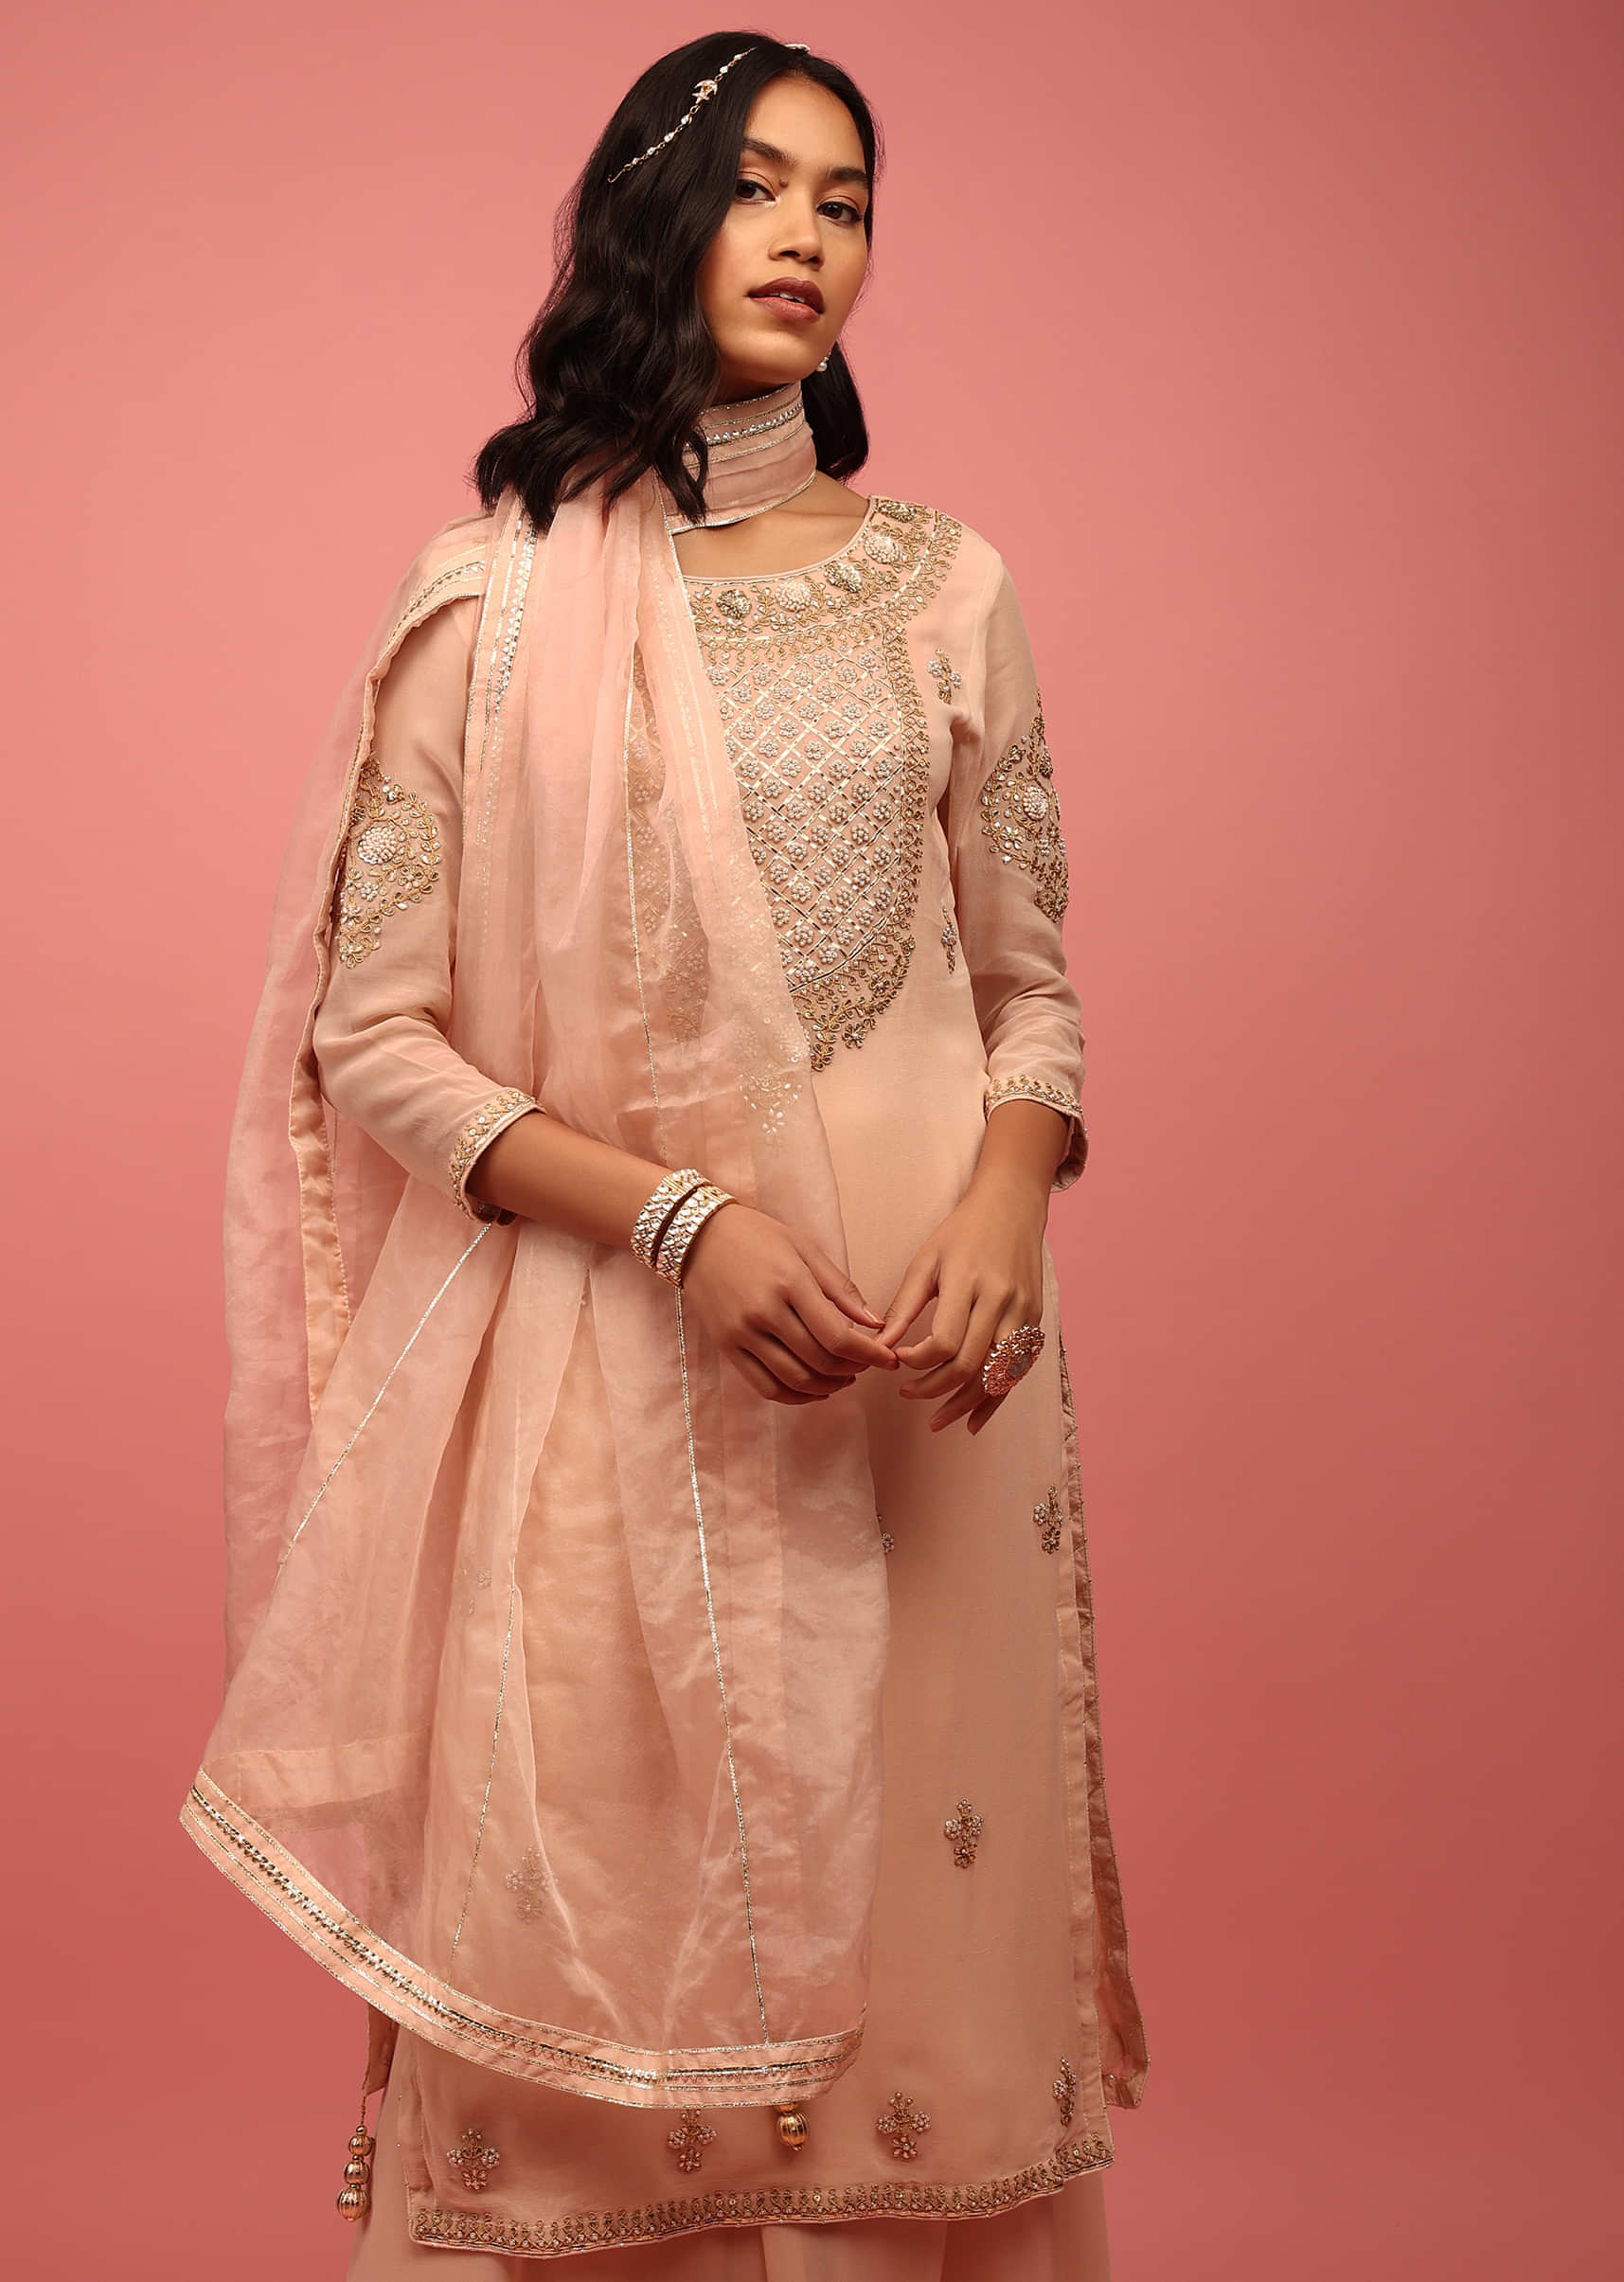 Peach Pink Palazzo Suit Hand Embroidered In Georgette With Zardosi, Sequins And Gotta Work